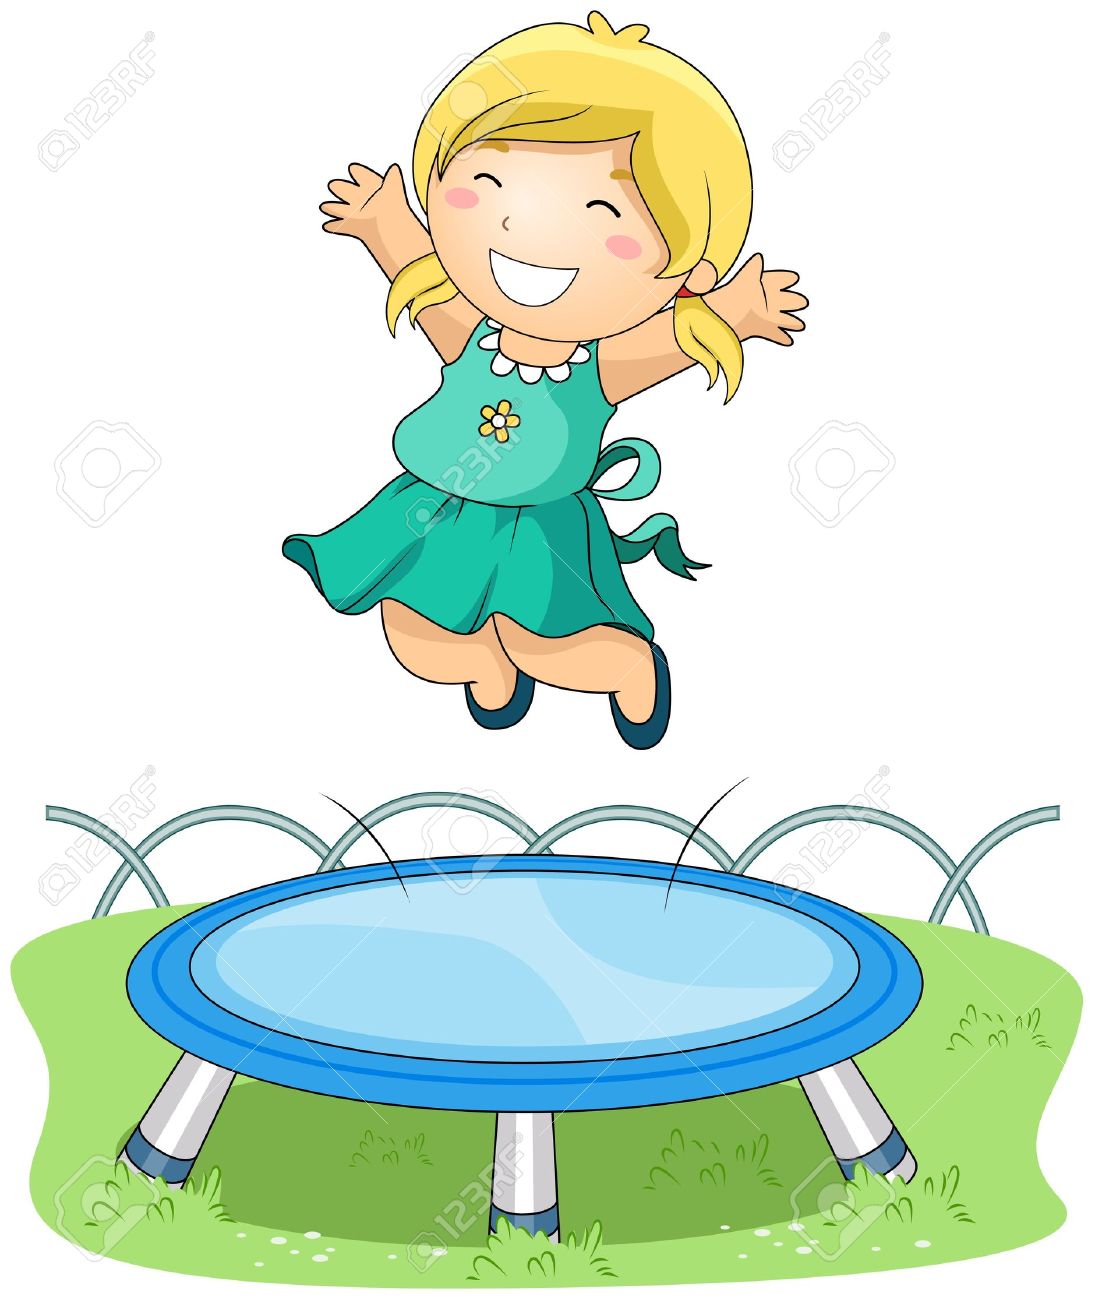 Free cliparts download clip. Jump clipart jumping girl